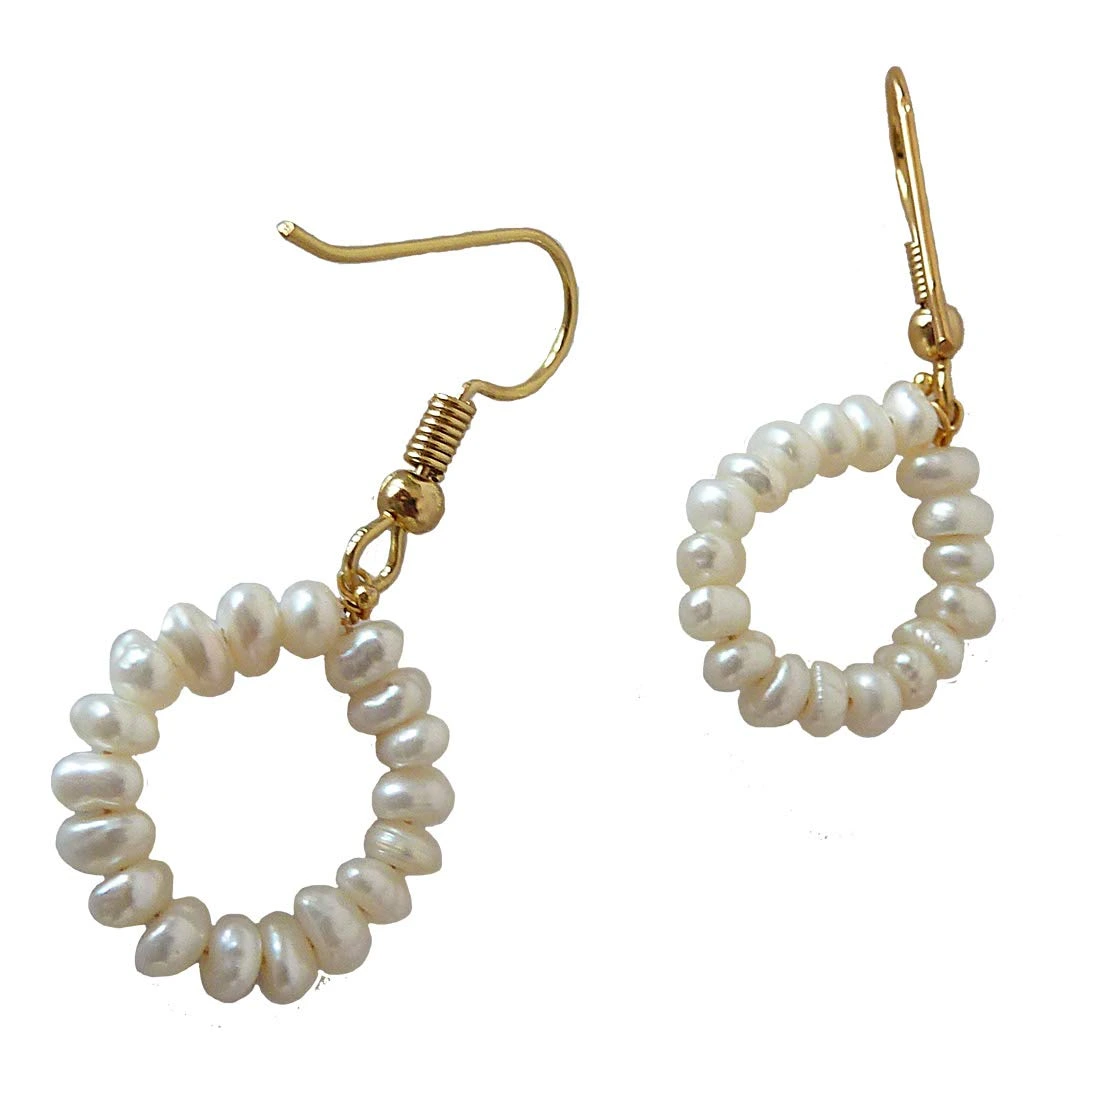 Dangling Circular Real Freshwater Pearl and Gold Plated Wire Style Earrings (SE379)